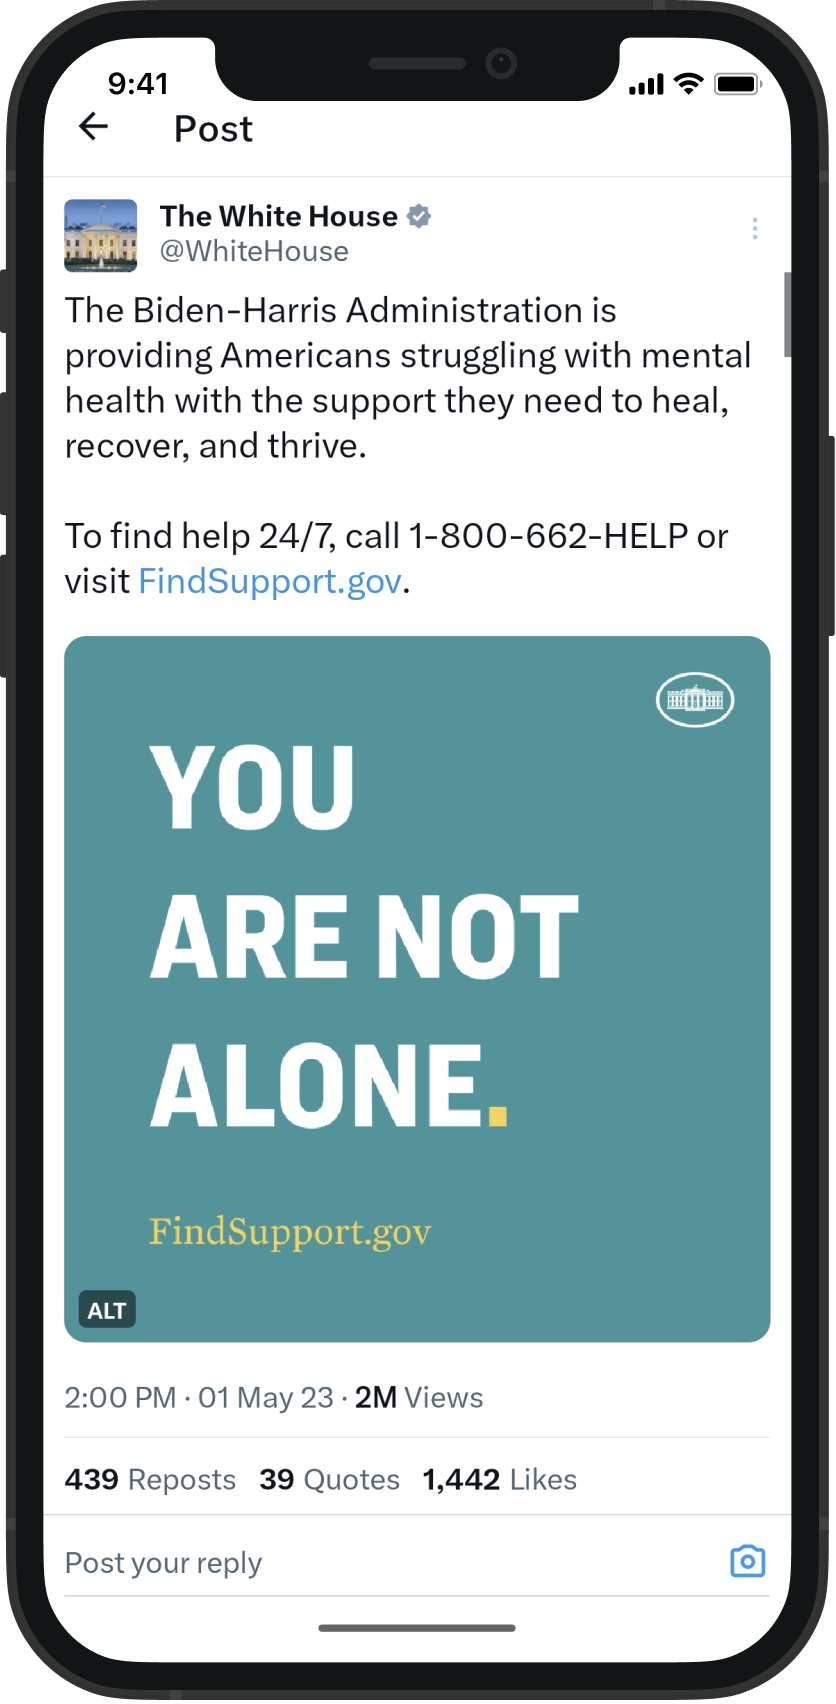 The White House posting on social media "The Biden-Harris Administration is providing Americans struggling with mental health, with the support they need to heal, recover, and thrive. To find help 24/7, call 1-800-622-HELP or visit Findsupport.gov